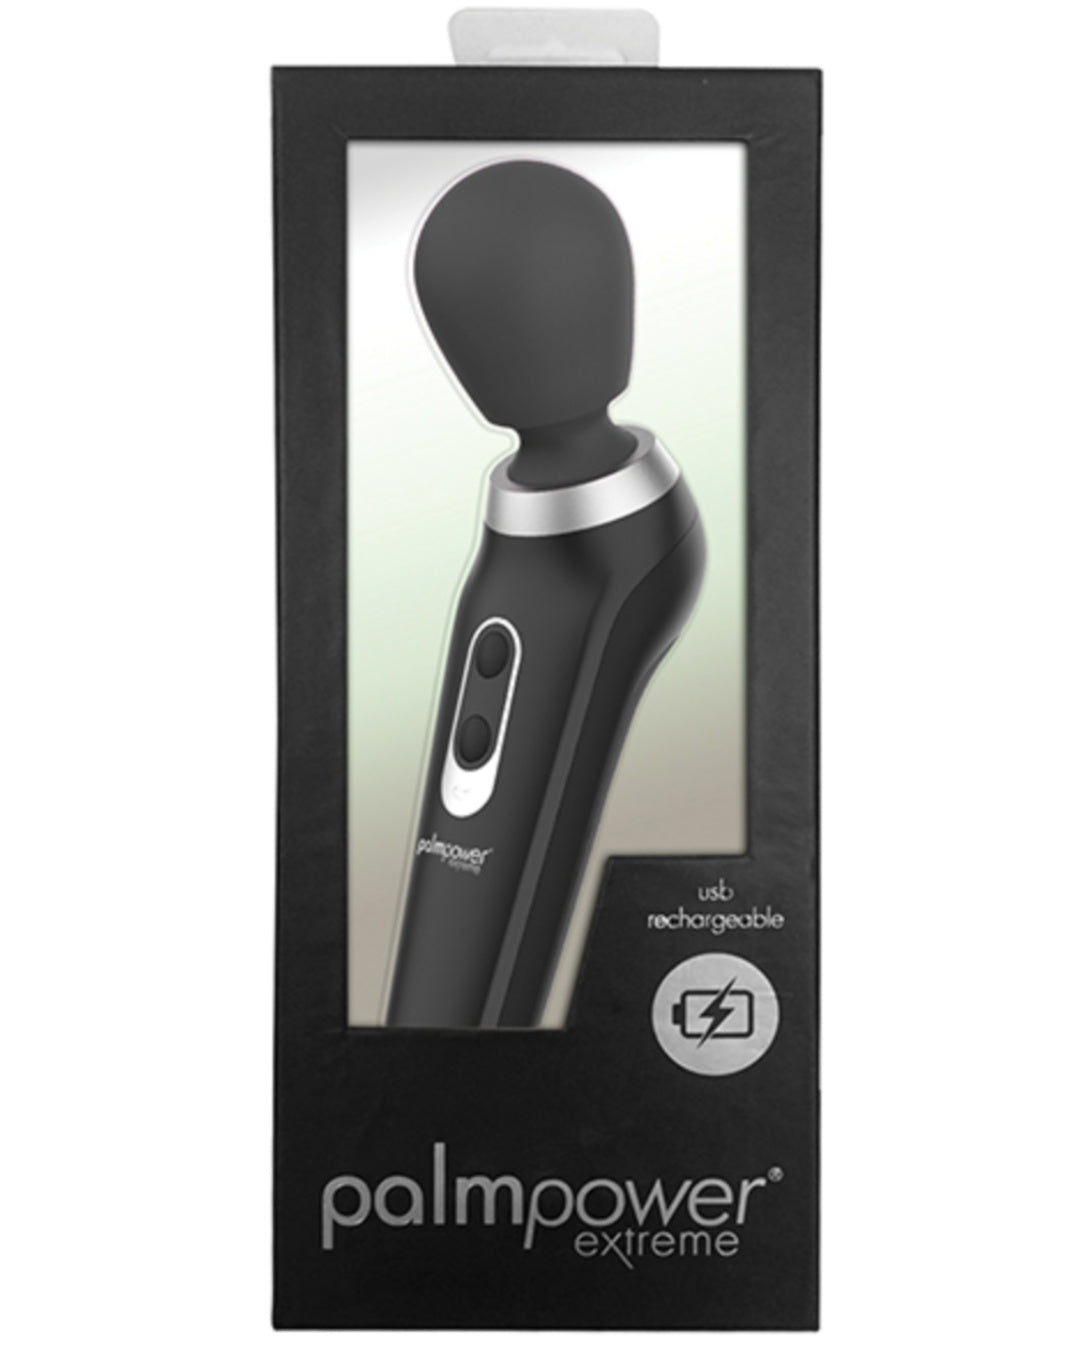 Palm Power Extreme Rechargeable Wand Vibrator by BMS Enterprises - Black in package